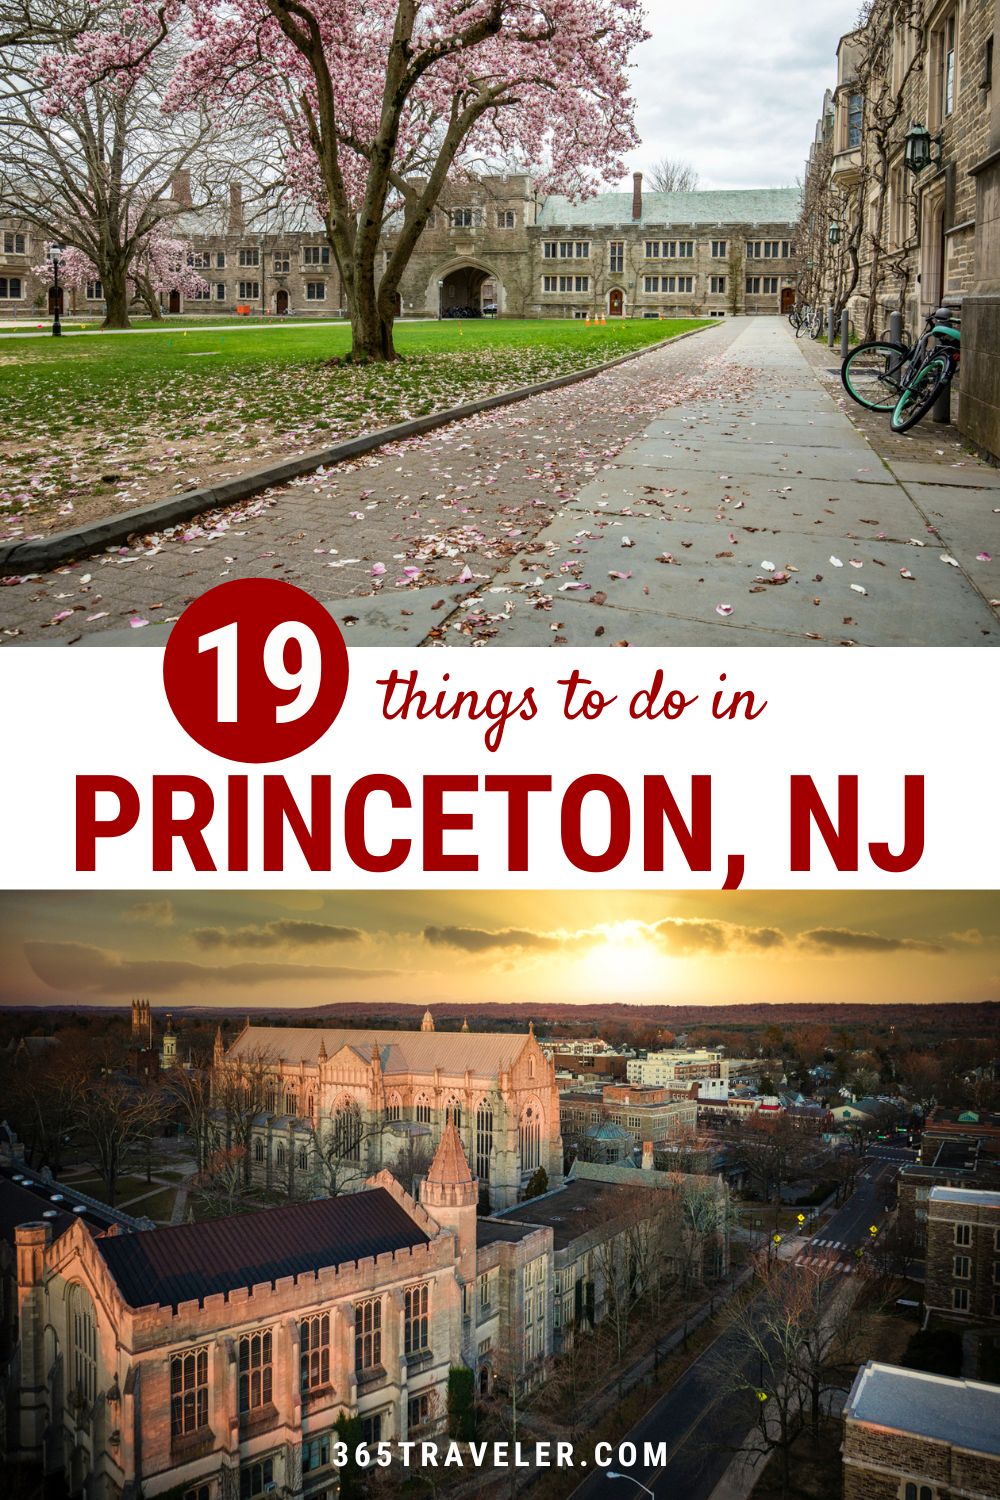 19 Things To Do in Princeton NJ You Can’t Miss